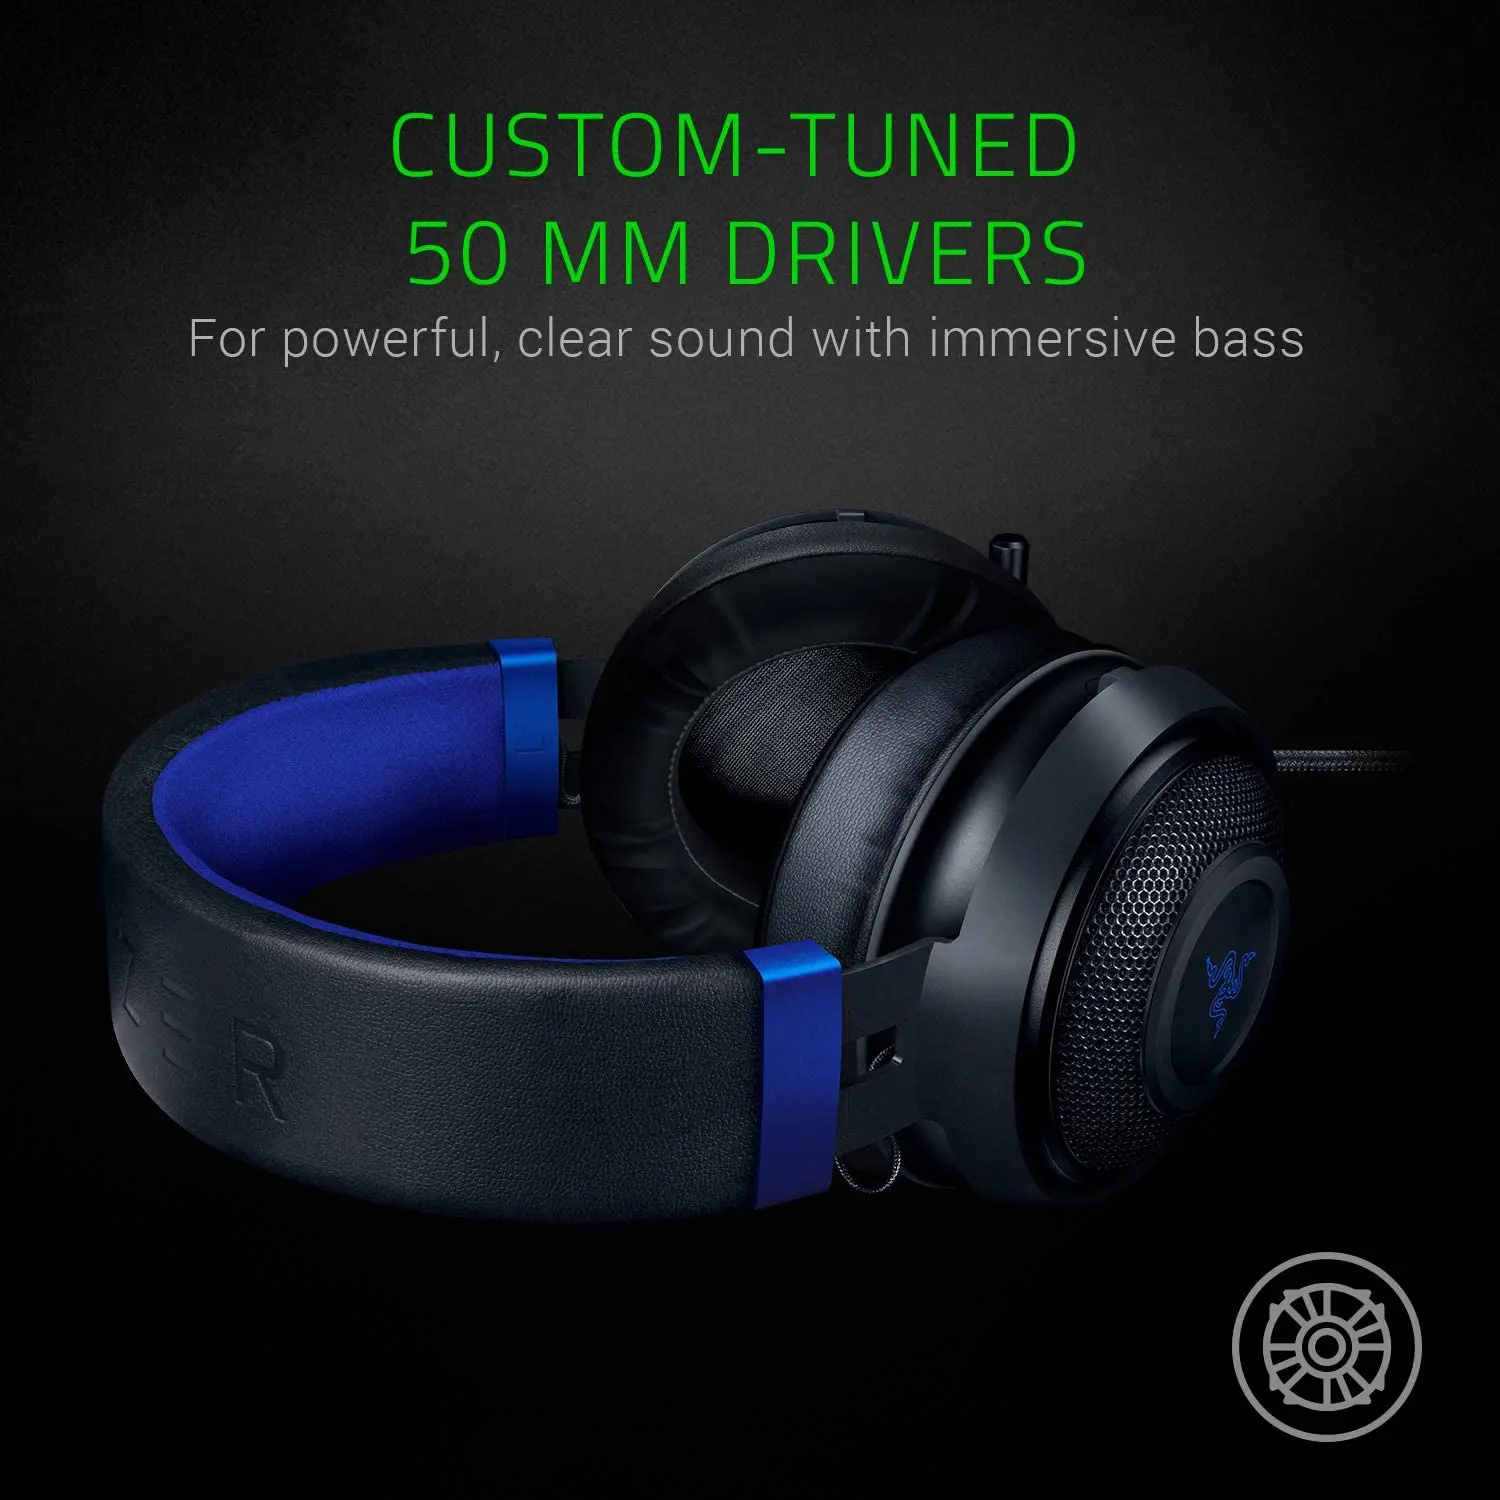 Console Gaming Headset - Razer Kraken X for Console